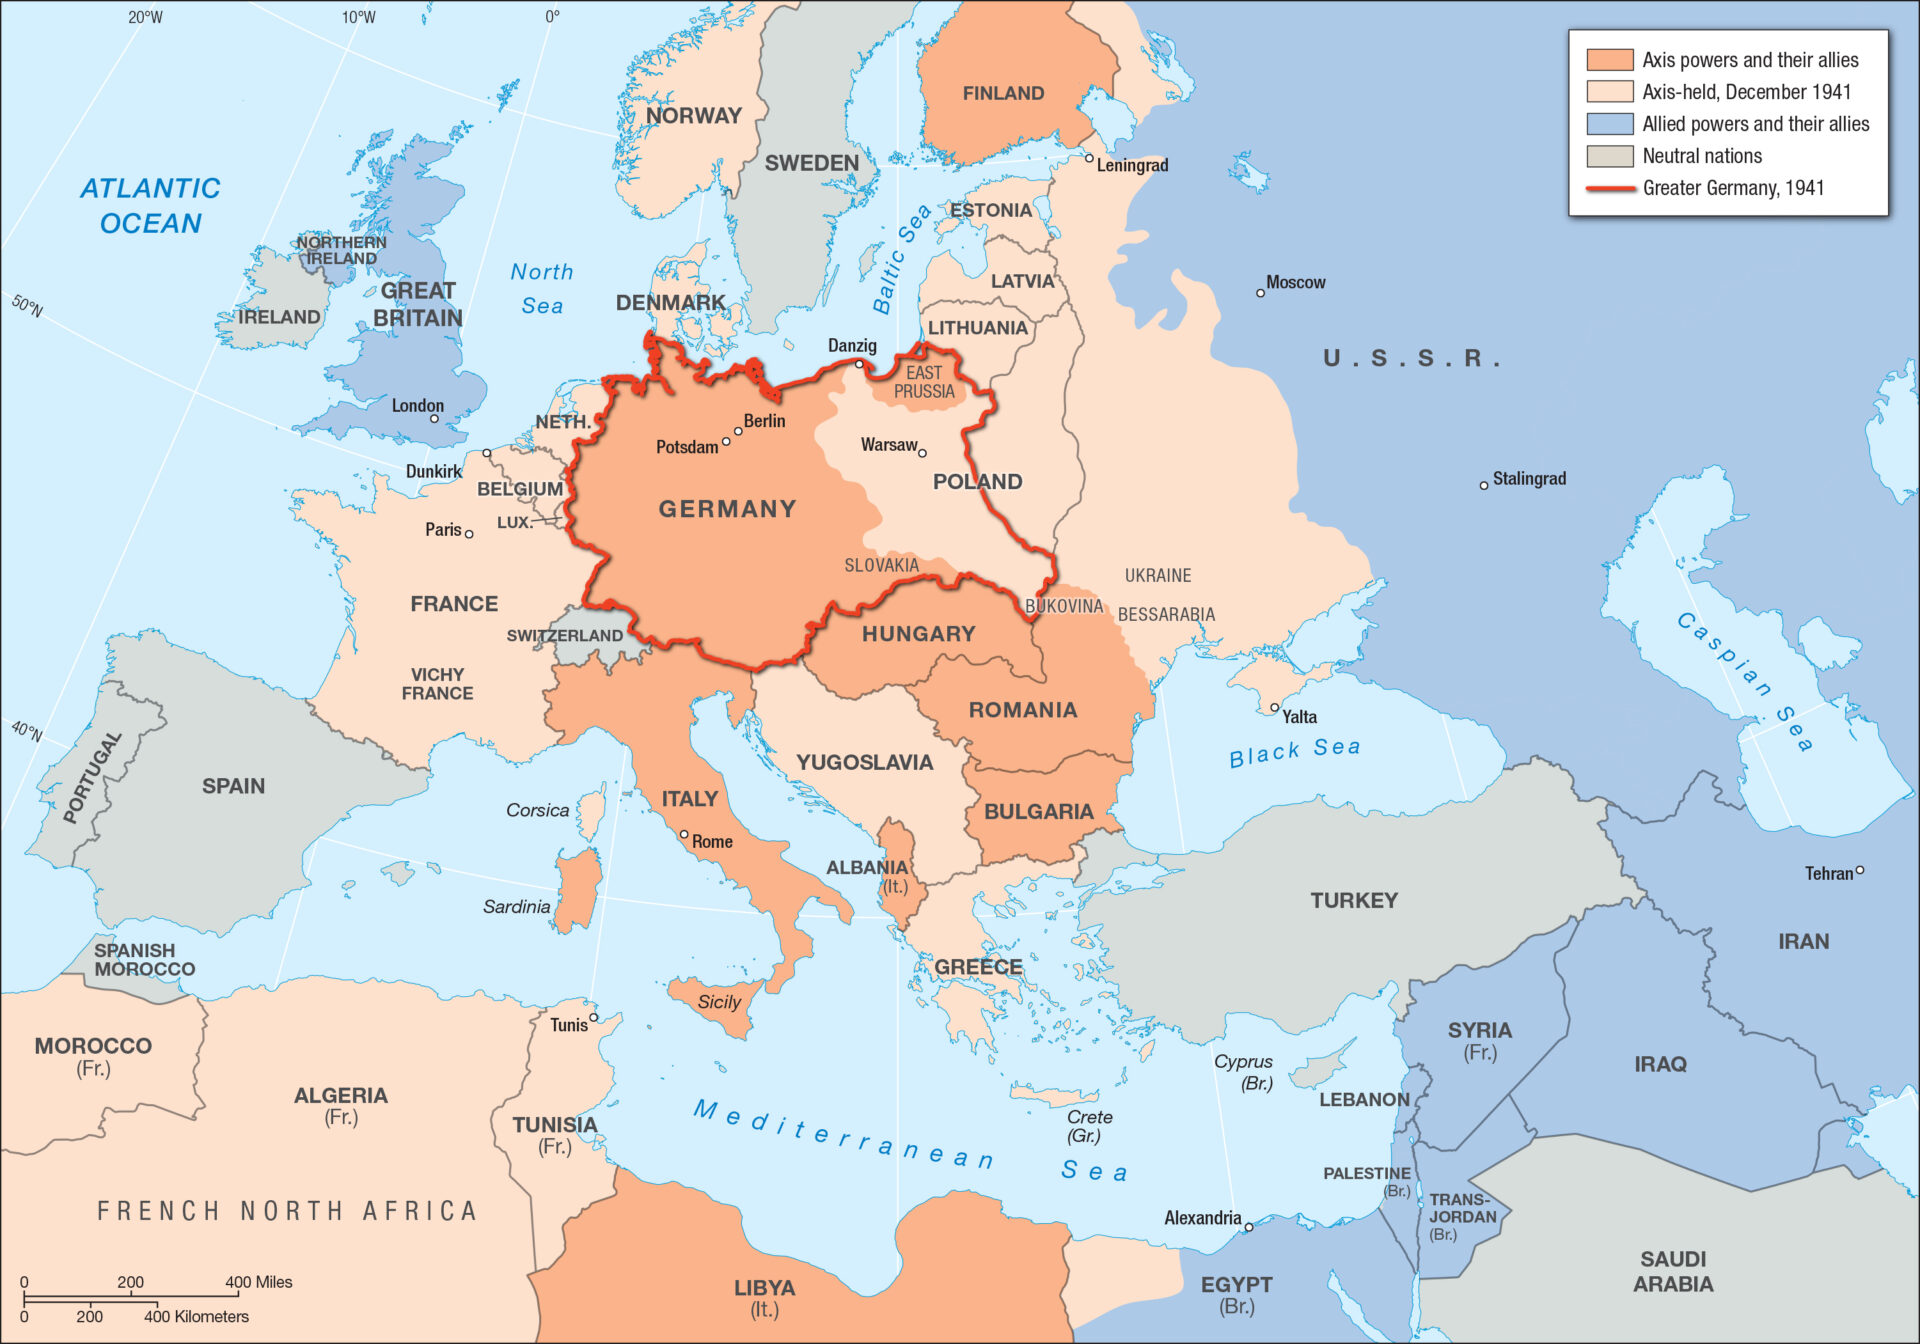 eastern europe after world war two the second world war